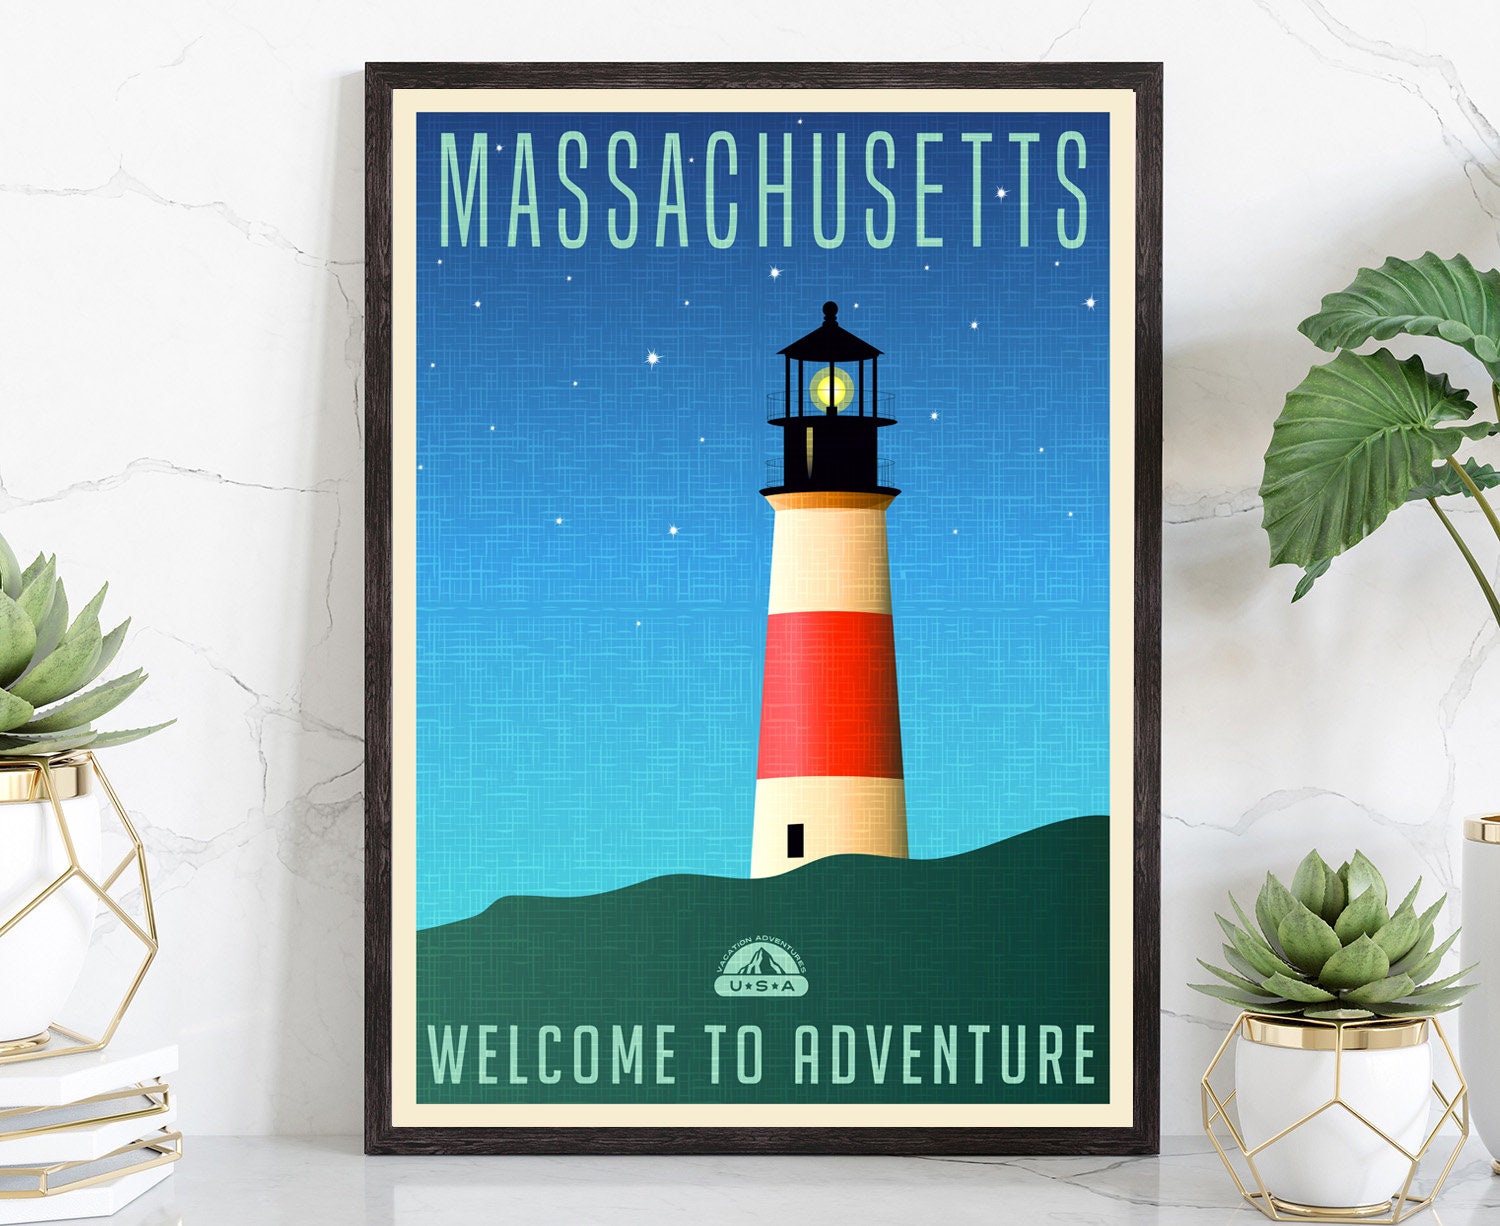 Retro Style Travel Poster, Massachusetts Vintage Rustic Poster Print, Home Wall Art, Office Wall Decor, Massachusetts State Map Poster